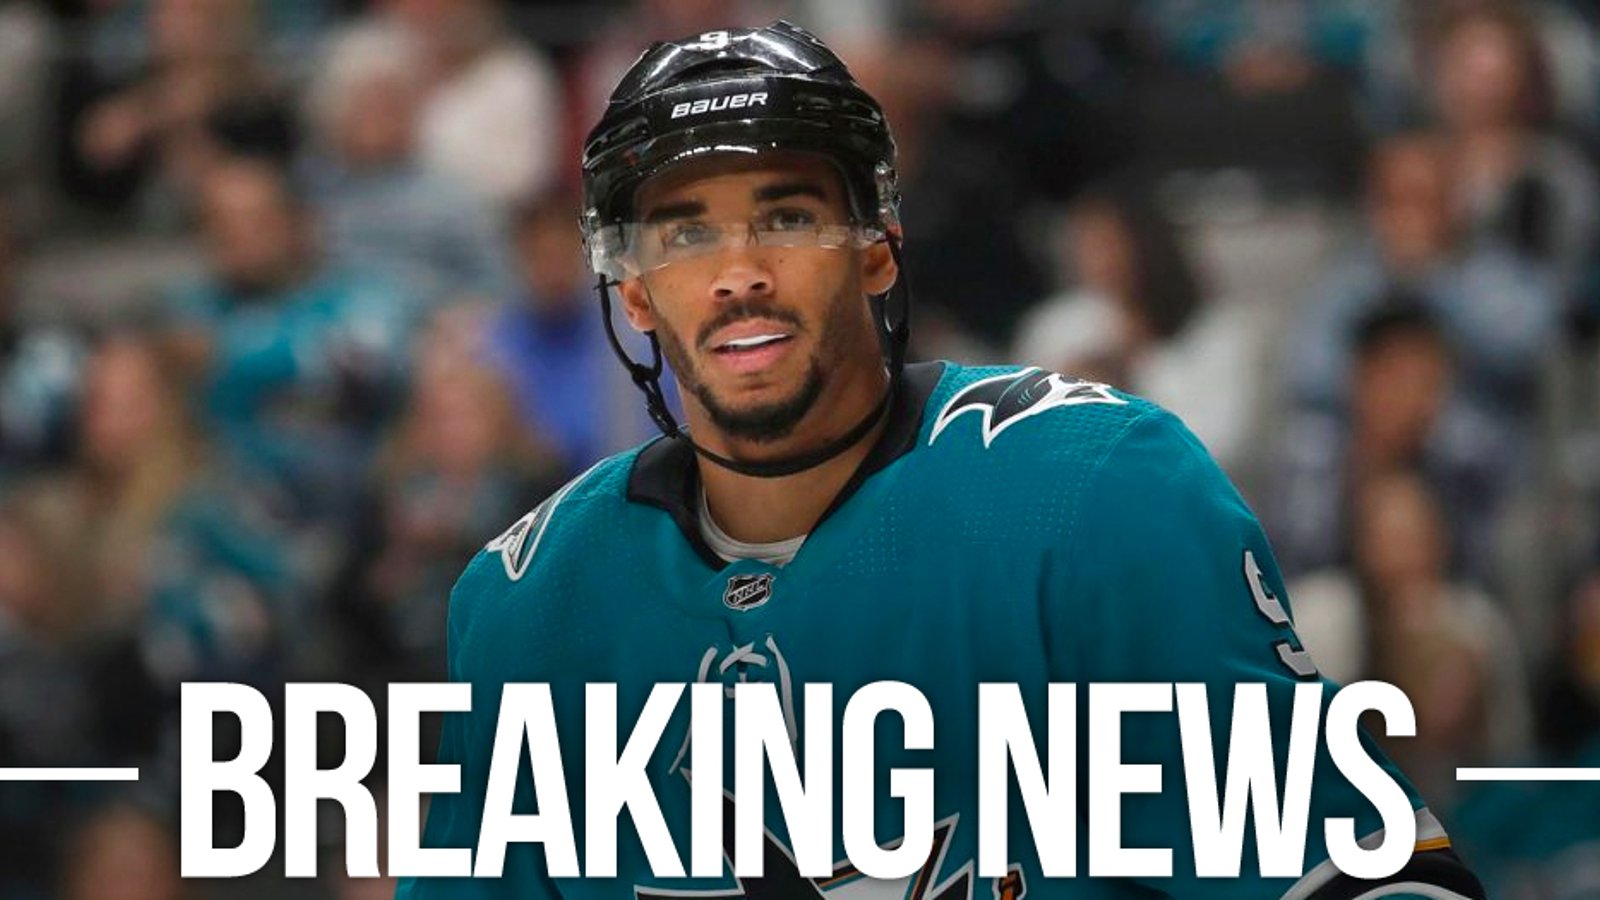 Evander Kane files for bankruptcy with nearly $30 million in debt